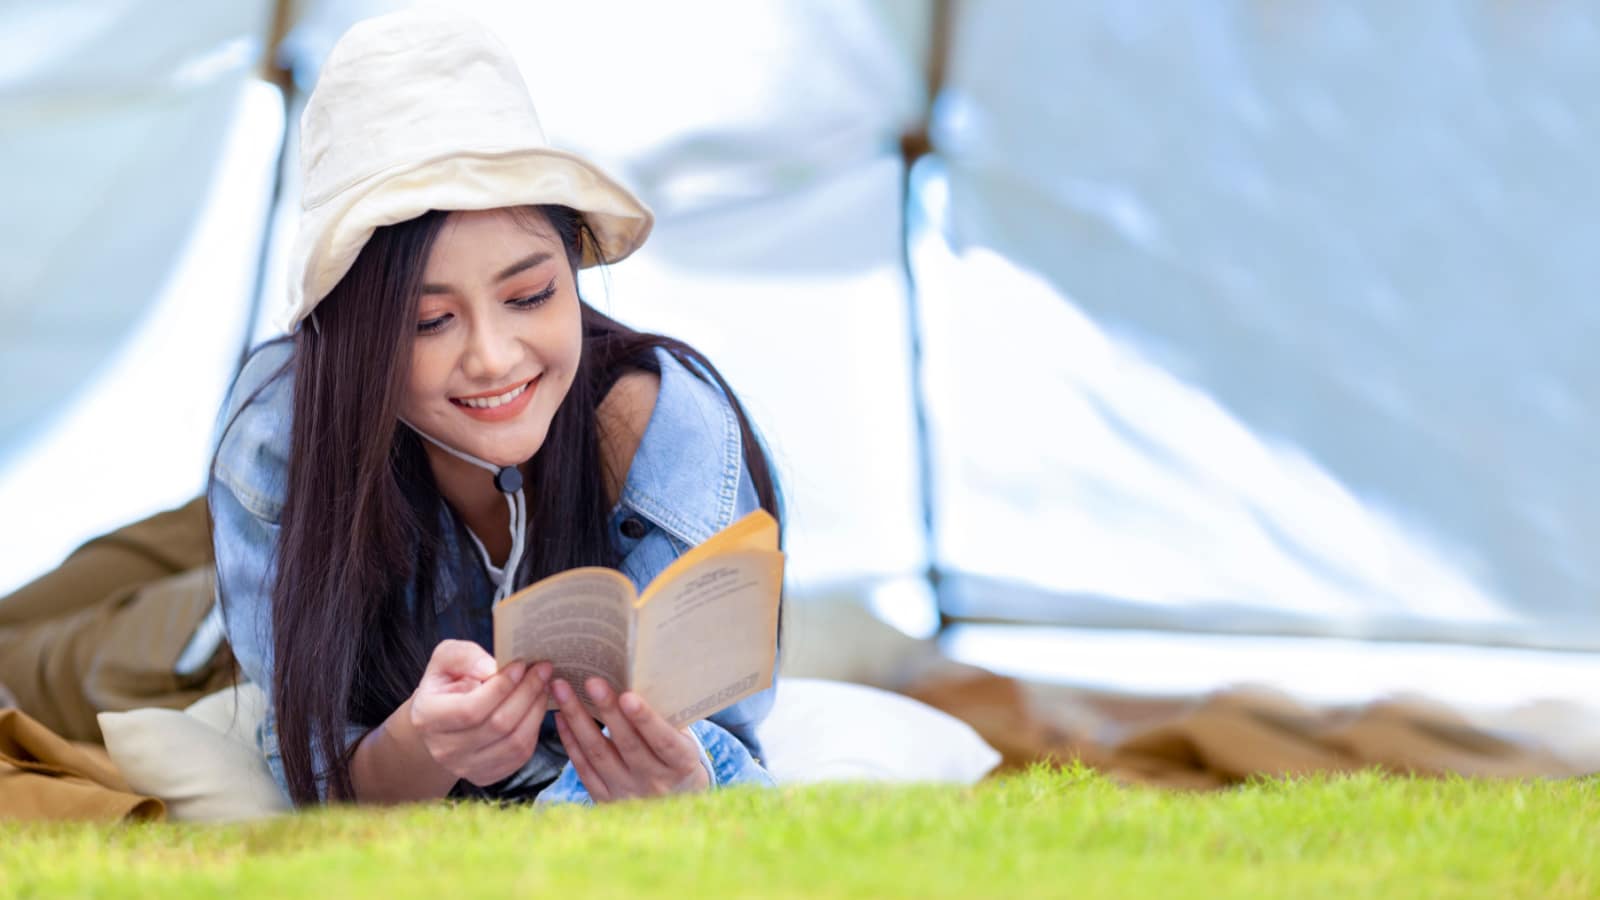 Asian woman is reading a book in her tent while camping outdoor during summer time in national park for adventure and active travel getaway, digital detox concept